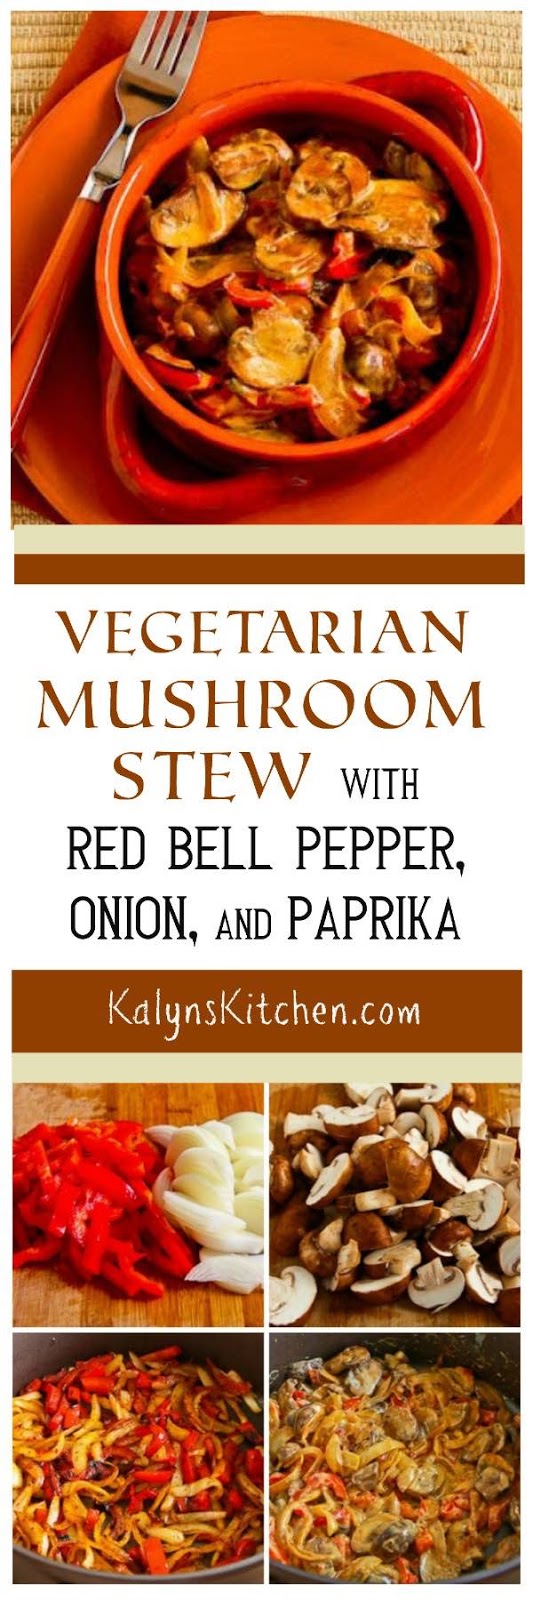 Vegetarian Mushroom Stew with Red Bell Pepper, Onion, and Paprika ...